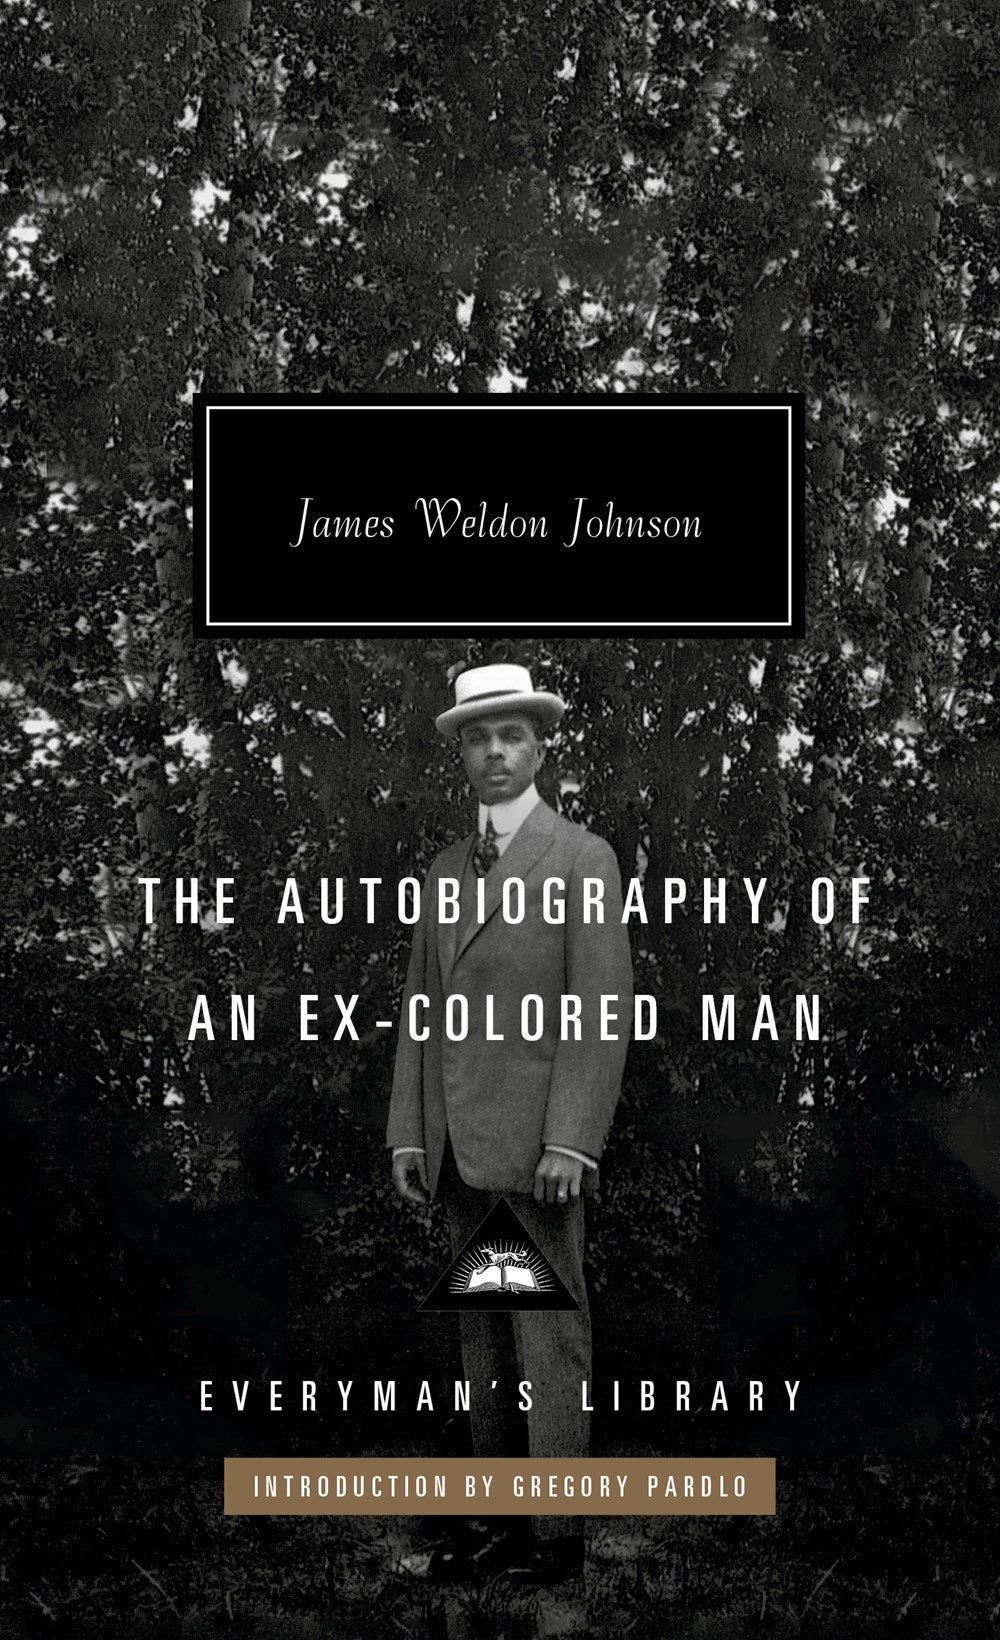 The Autobiography of an Ex-Colored Man: Introduction by Gregory Pardlo by James Weldon Johnson